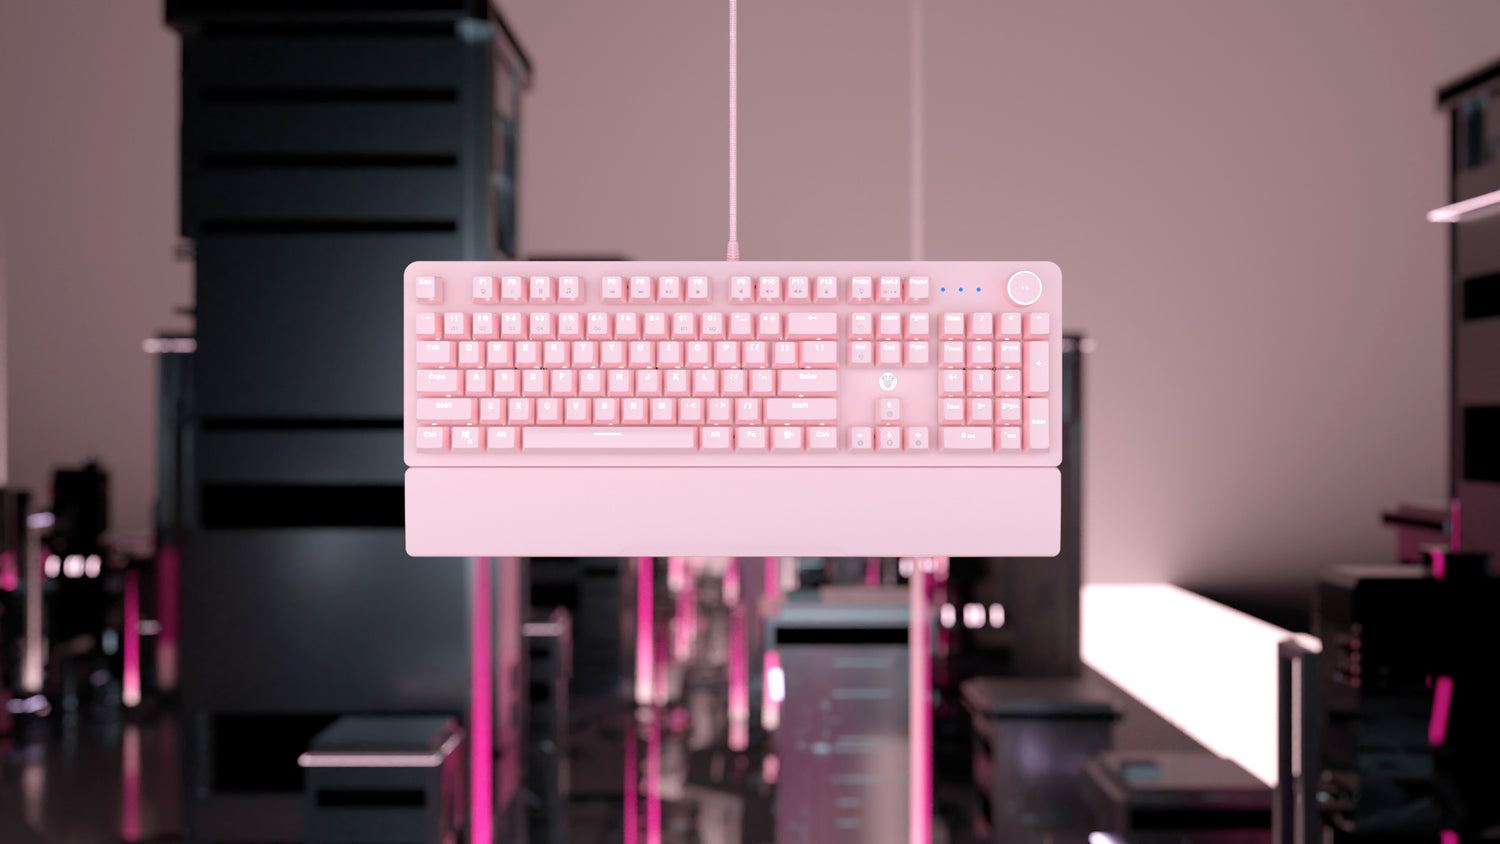 A large marketing image providing additional information about the product Fantech Mechanical Keyboard White Backlit with Wrist Rest - Sakura Pink - Red Switch - Additional alt info not provided